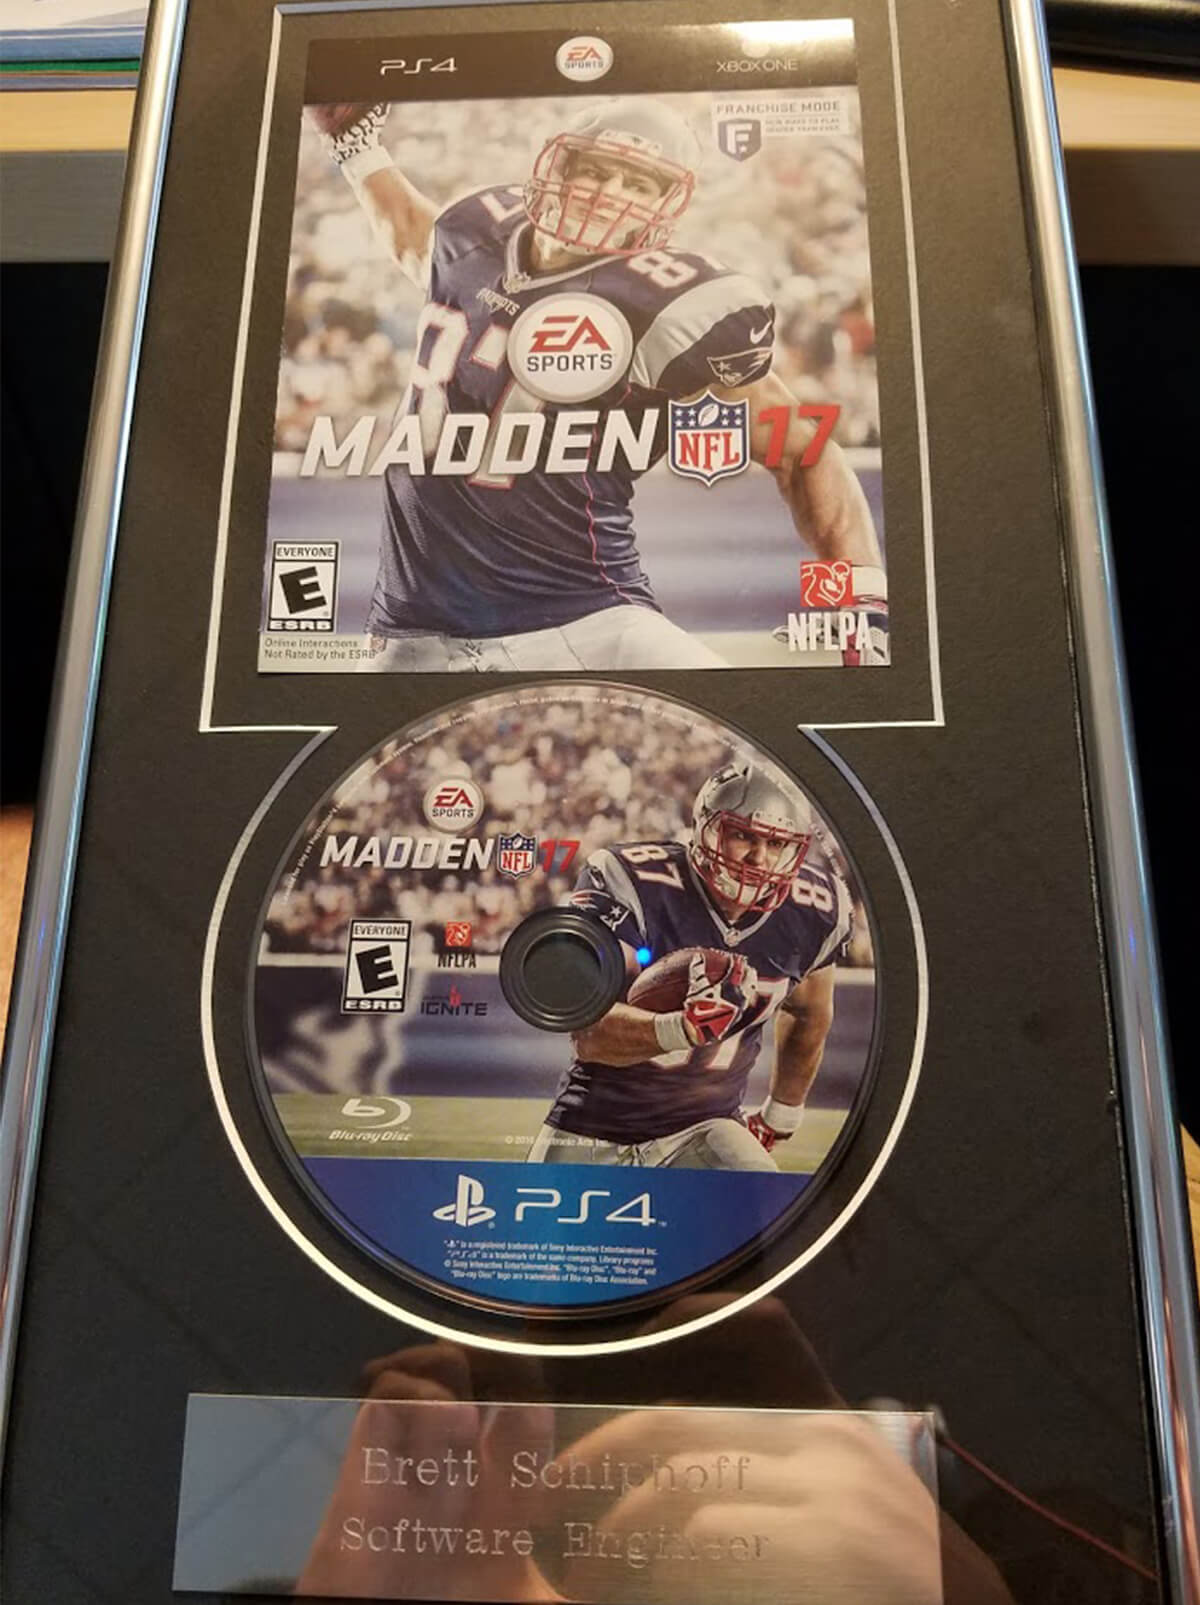 A picture of a commemorative plaque Brett Schipoff received for shipping Madden NFL 17.